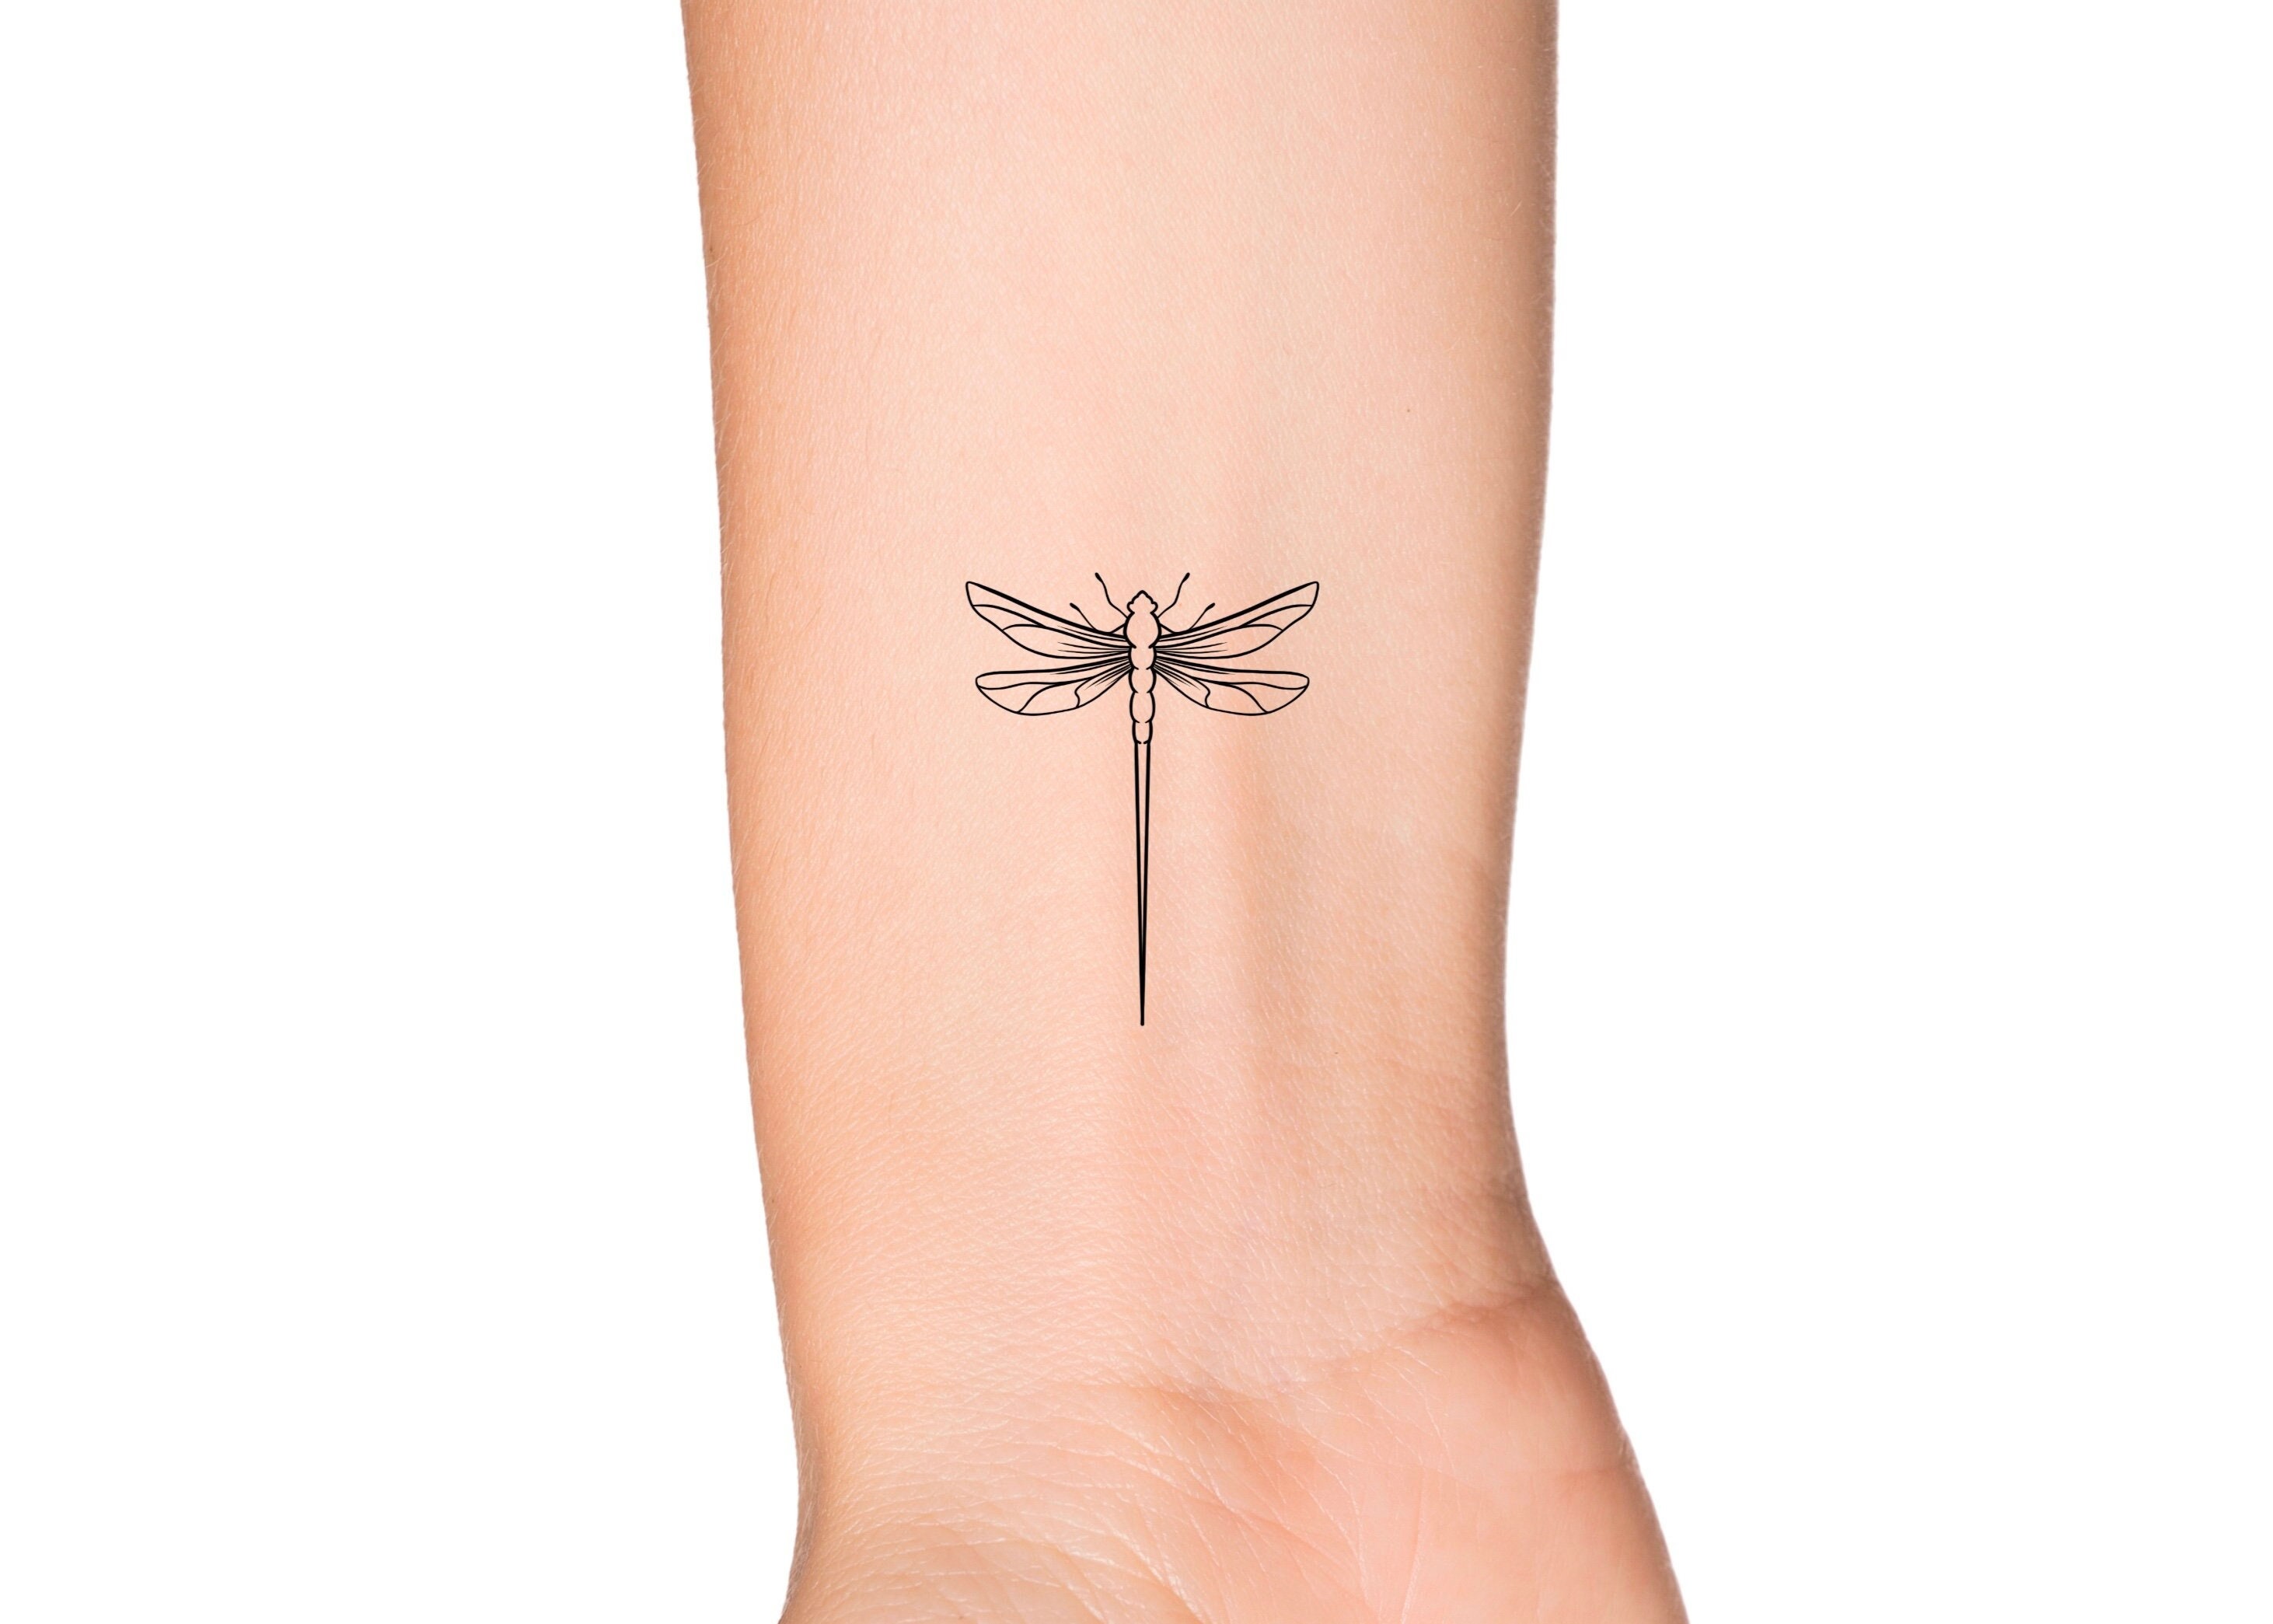 Dragonfly flash was picked up and personalized a bit Done by me Body  Language Tattoo Indianapolis IN Who digs minimalistgeometric stuffs   rtattoo